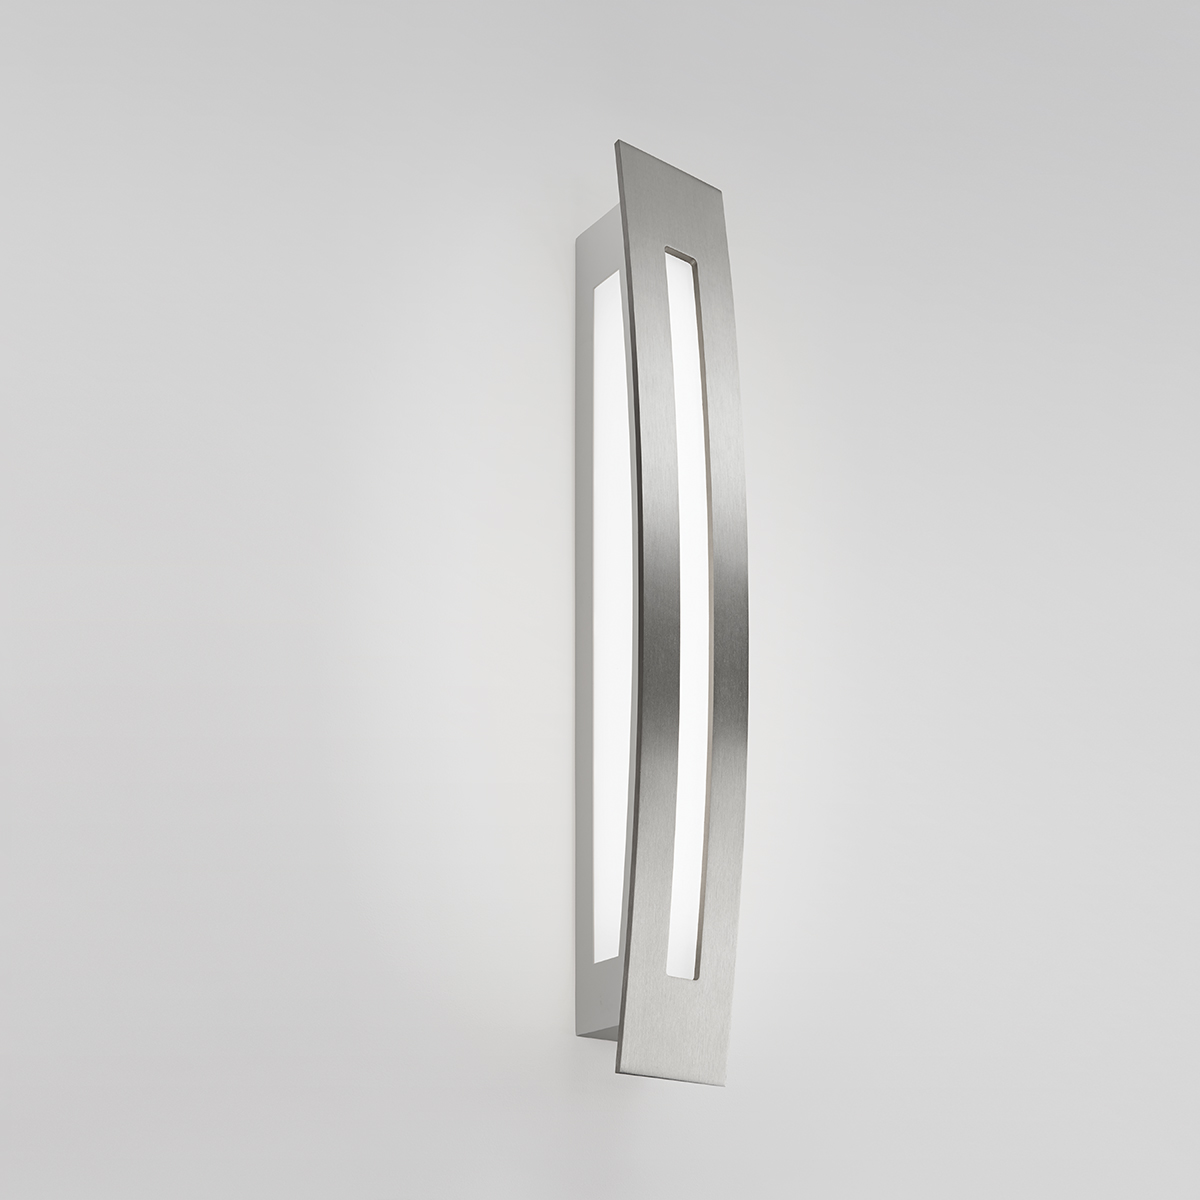 A long, multi-sided wall sconce with diffuse light cutouts 